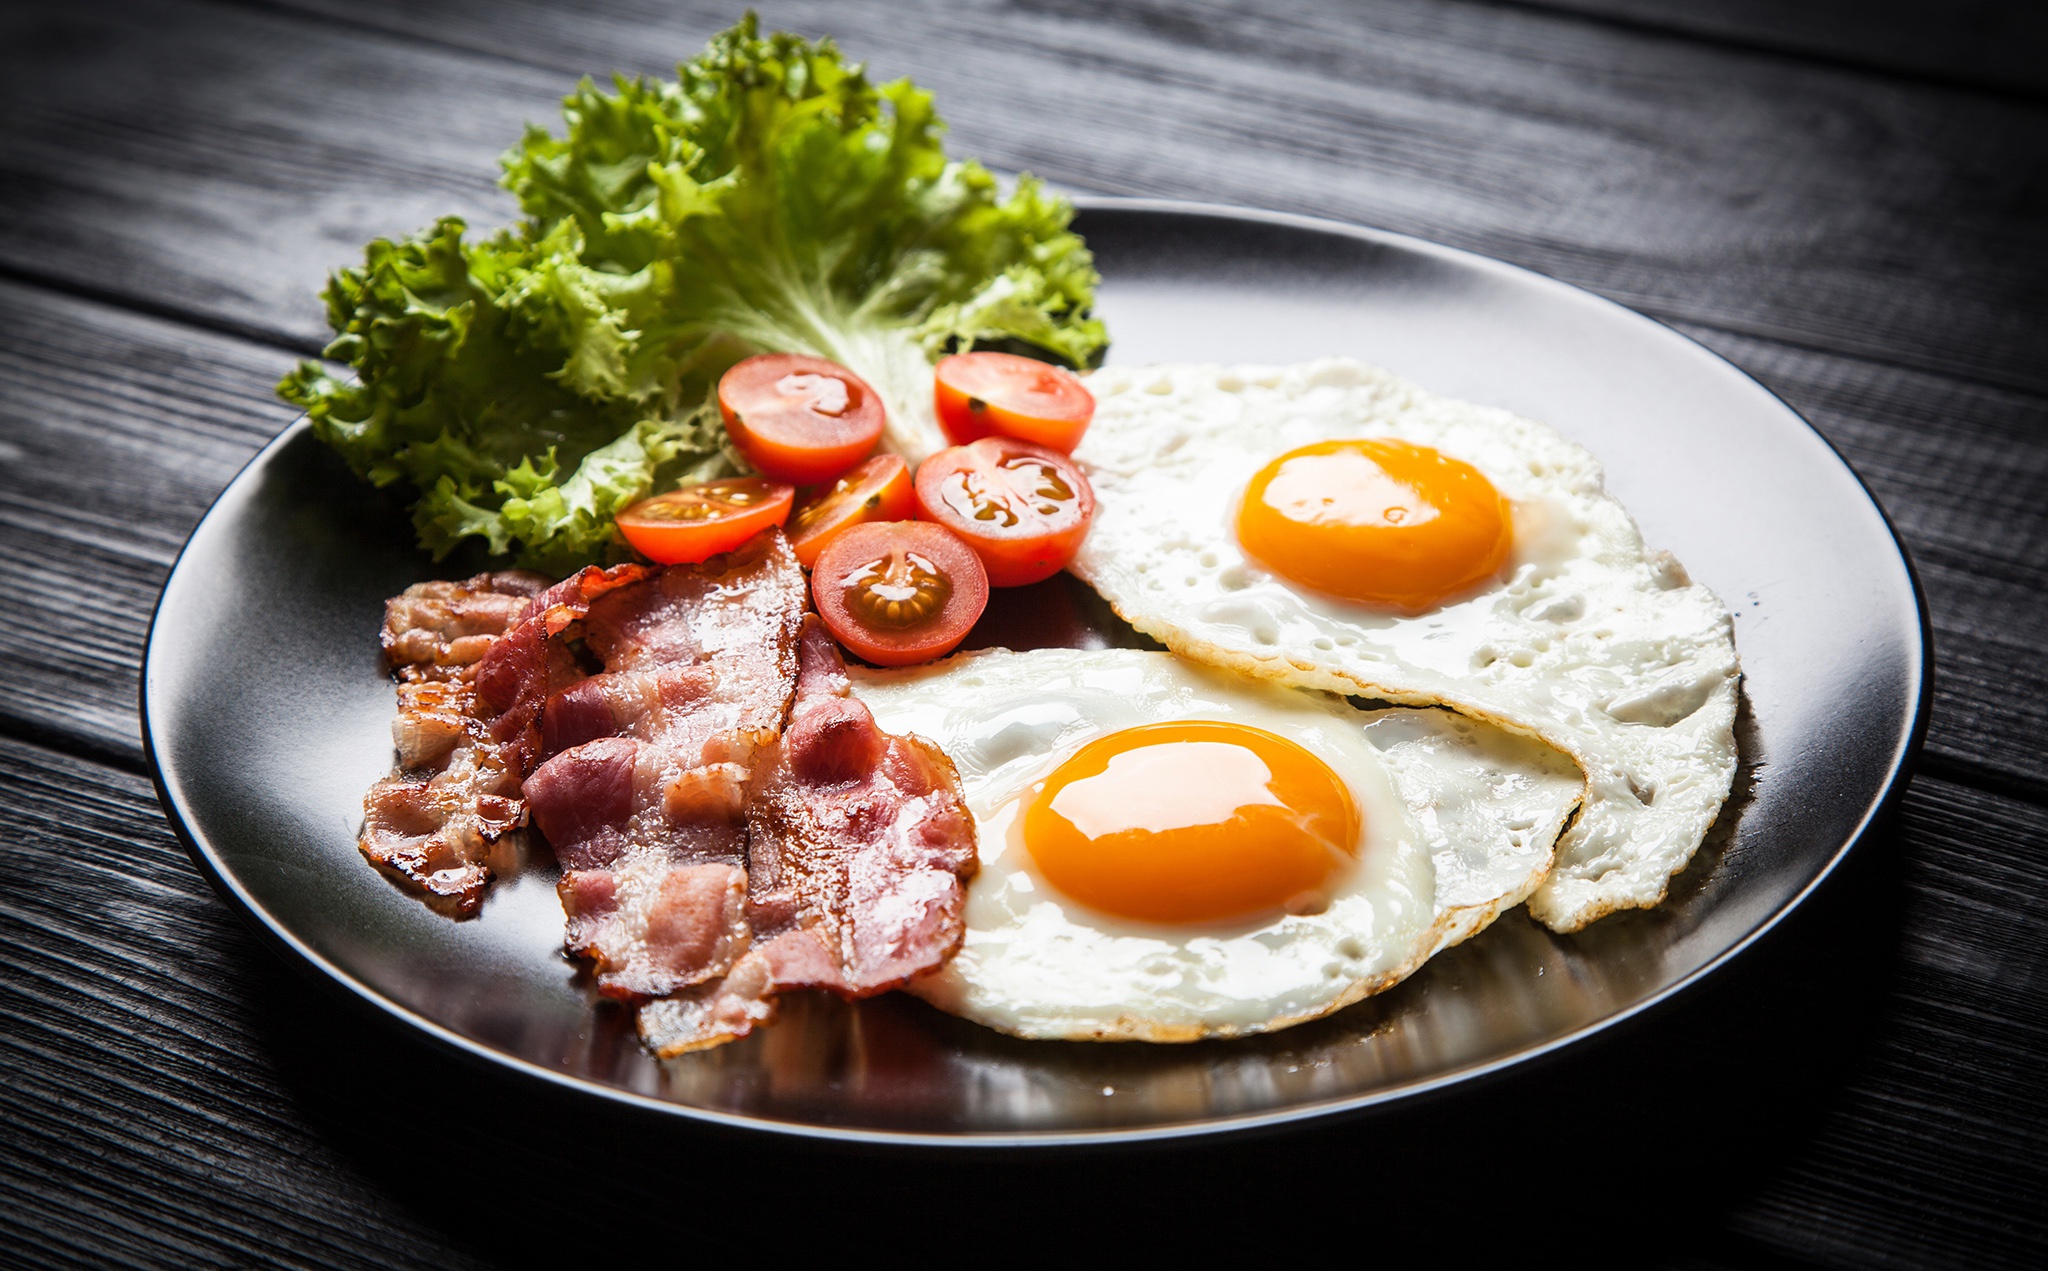 General 2048x1271 bacon food eggs tomatoes lettuce plates closeup wooden surface still life